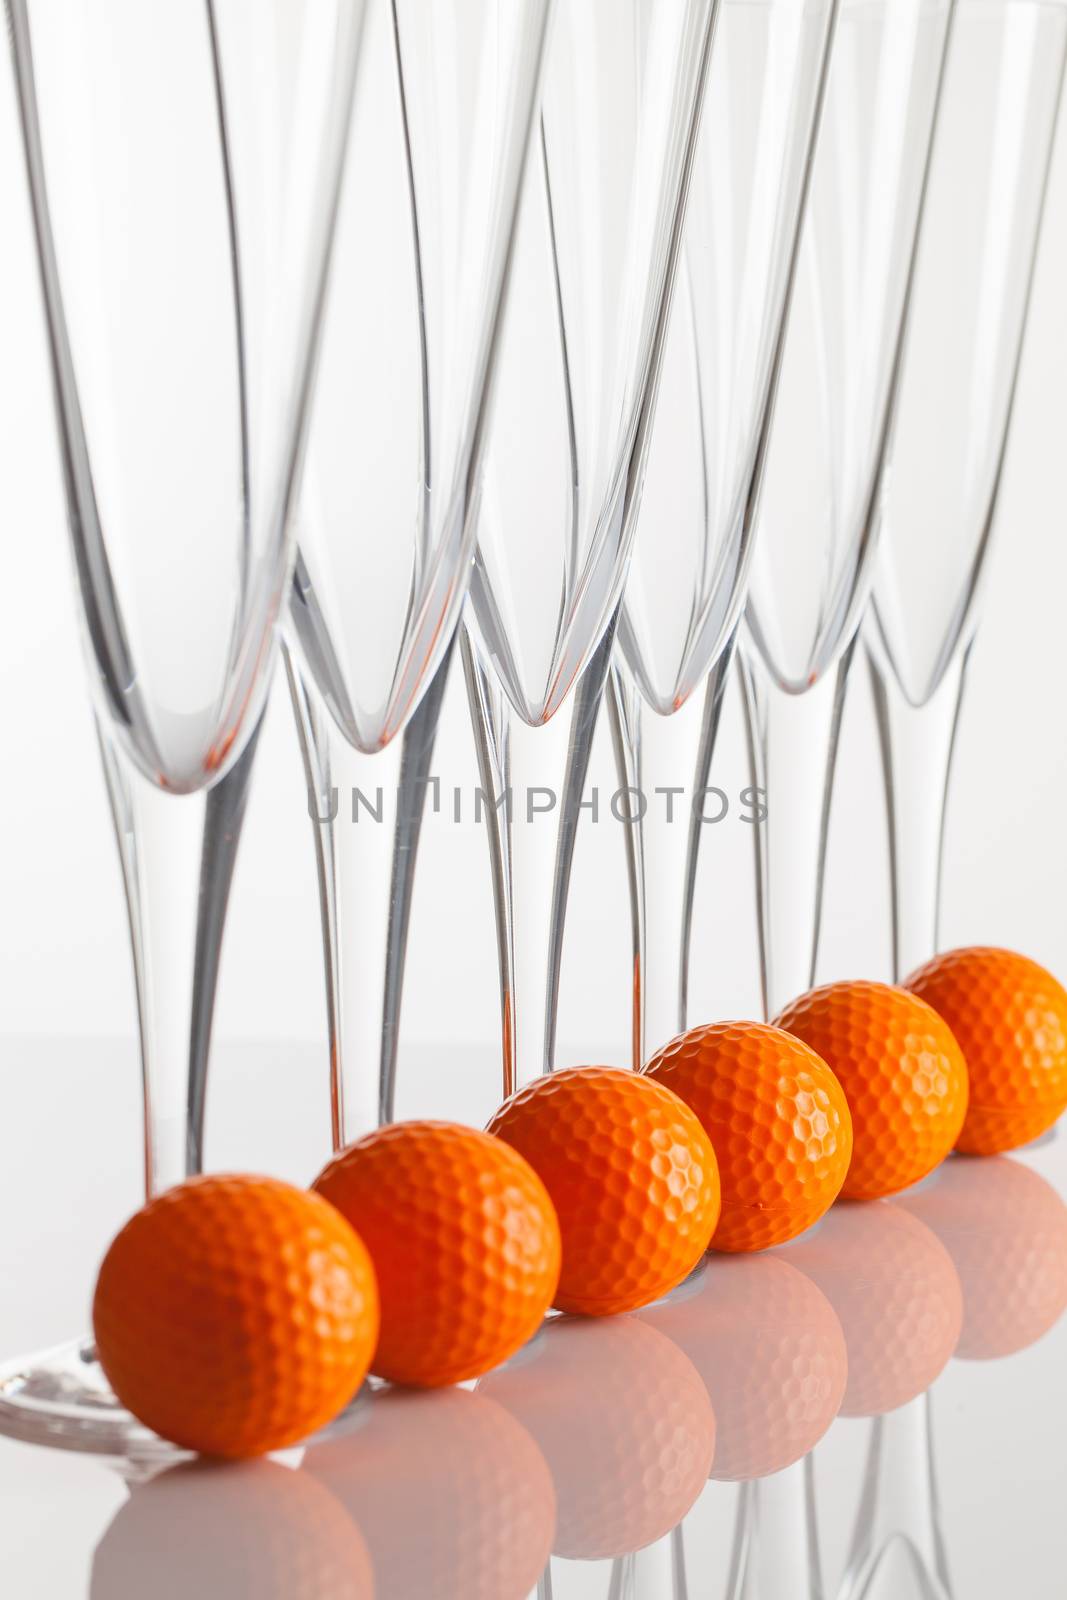 Glasses of champagne and golf equipments on a glass table by CaptureLight